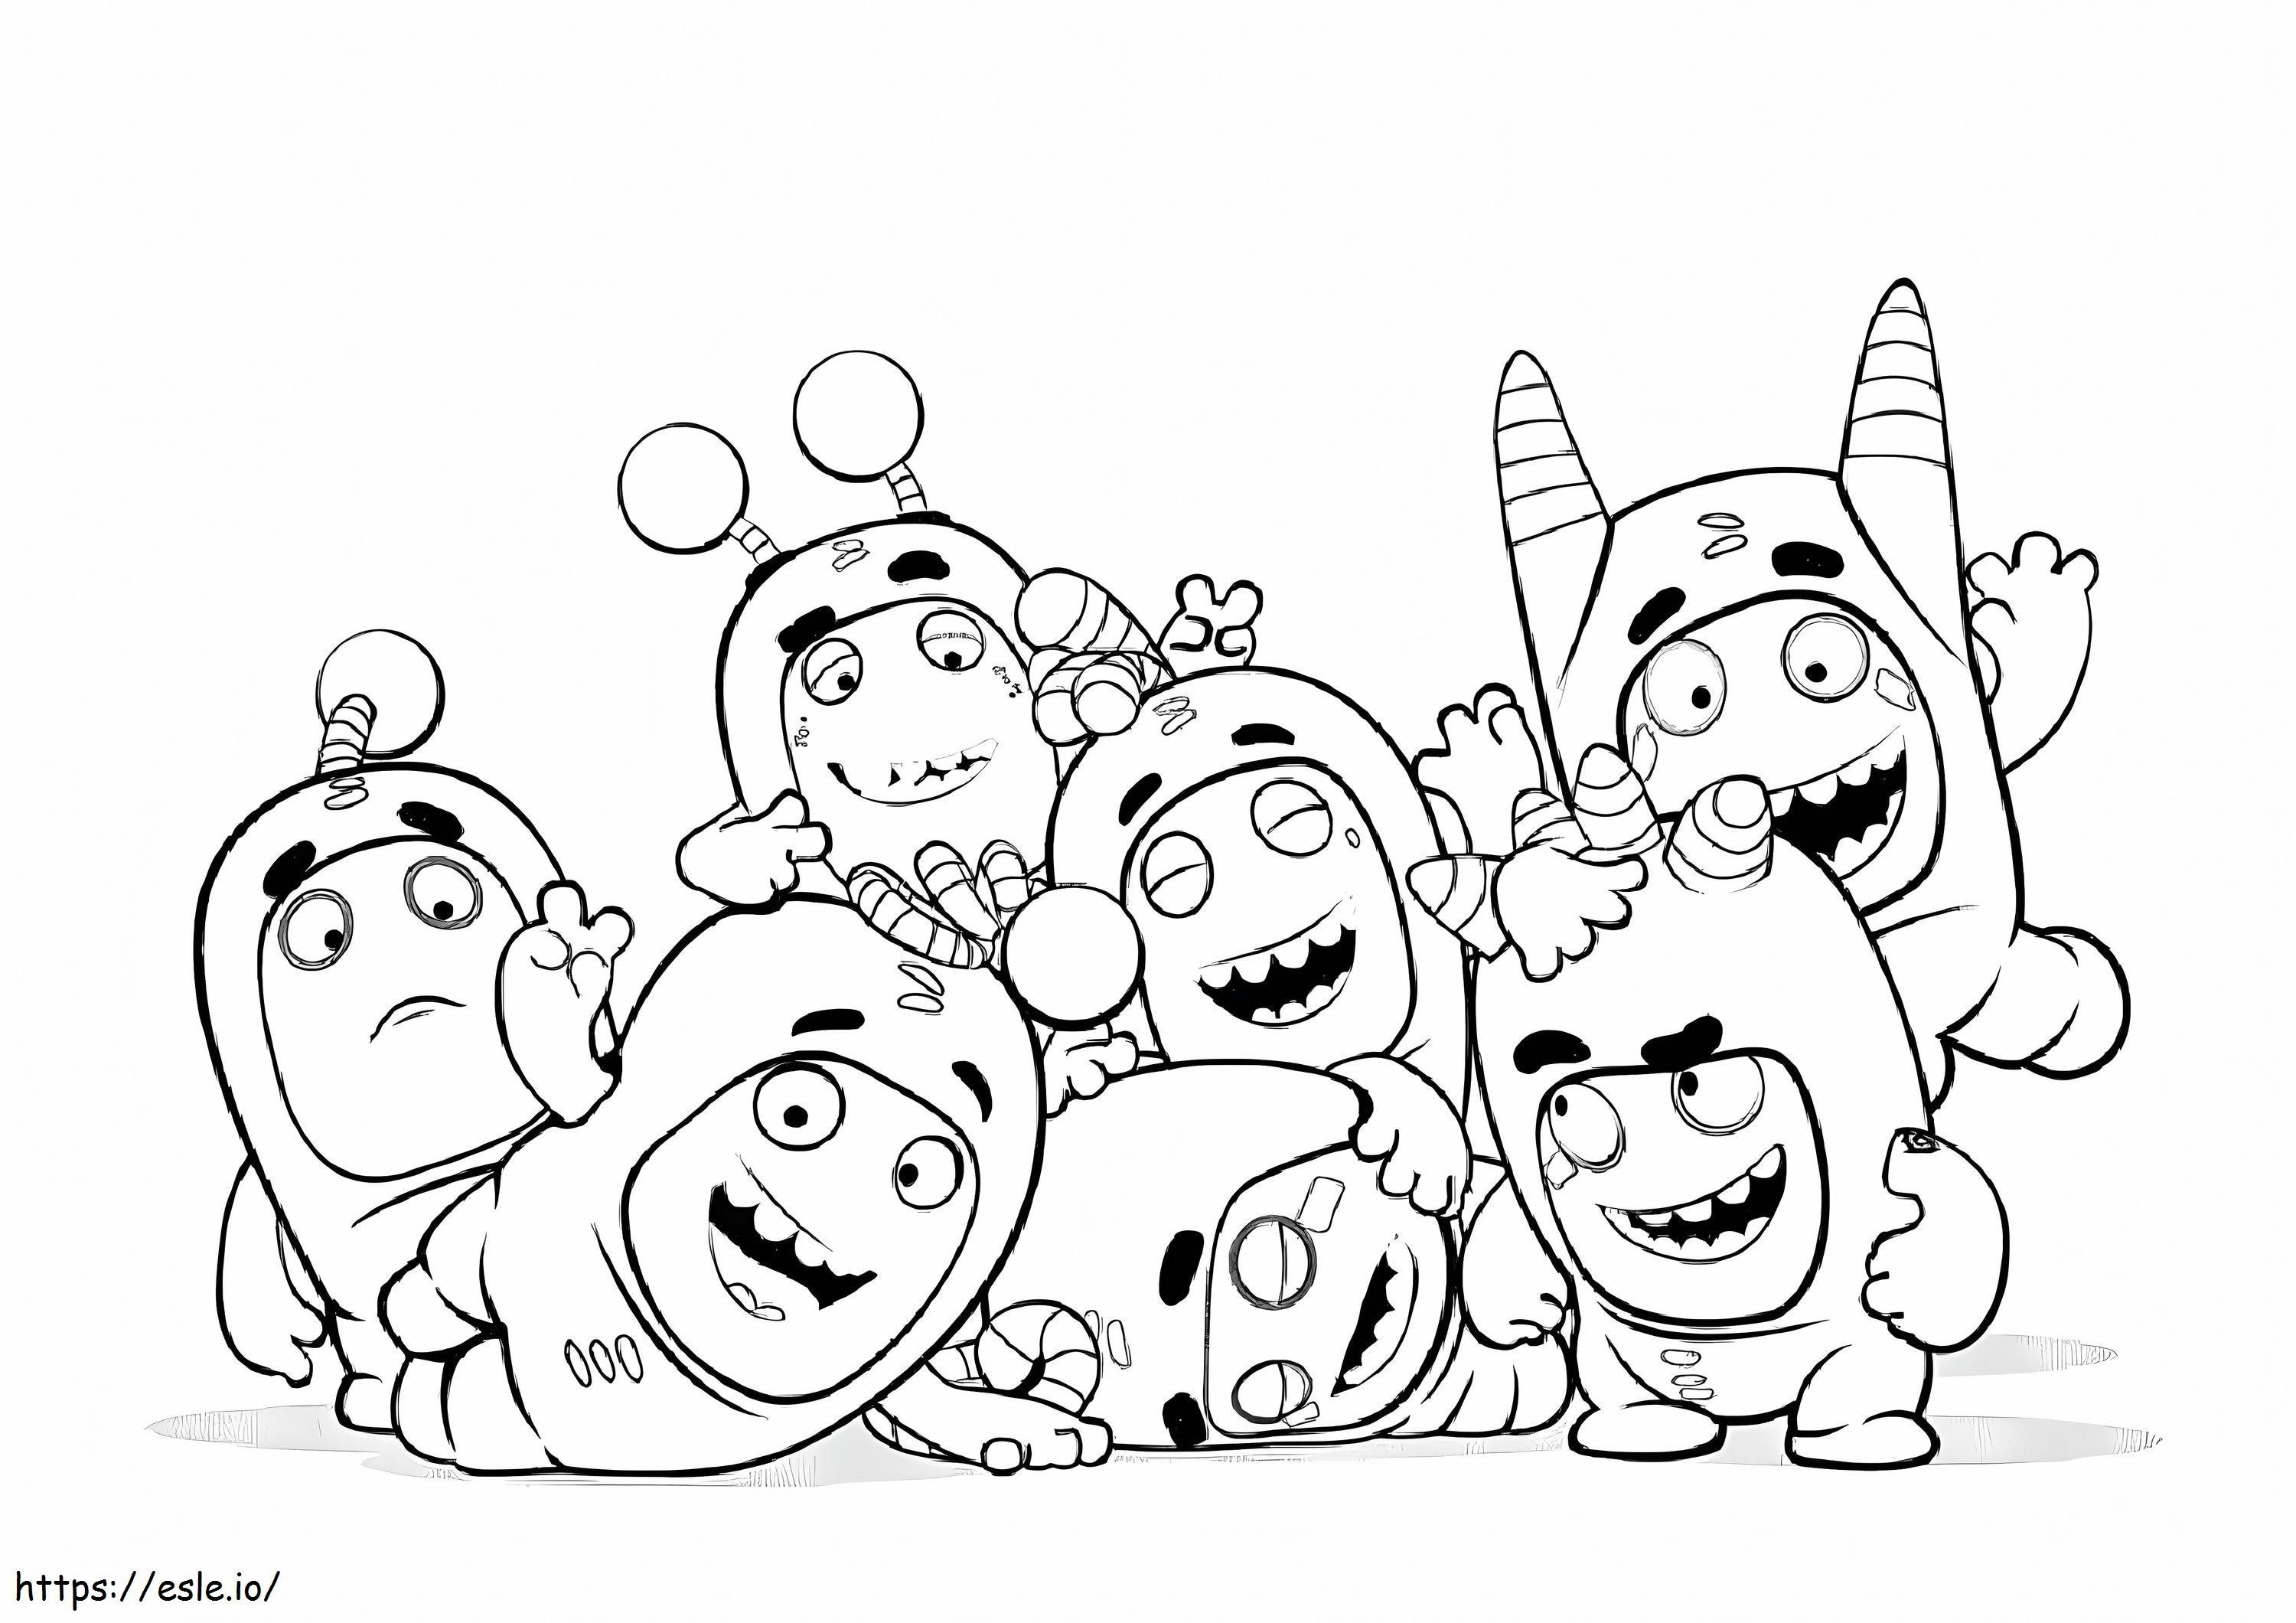 Funny Oddbods coloring page